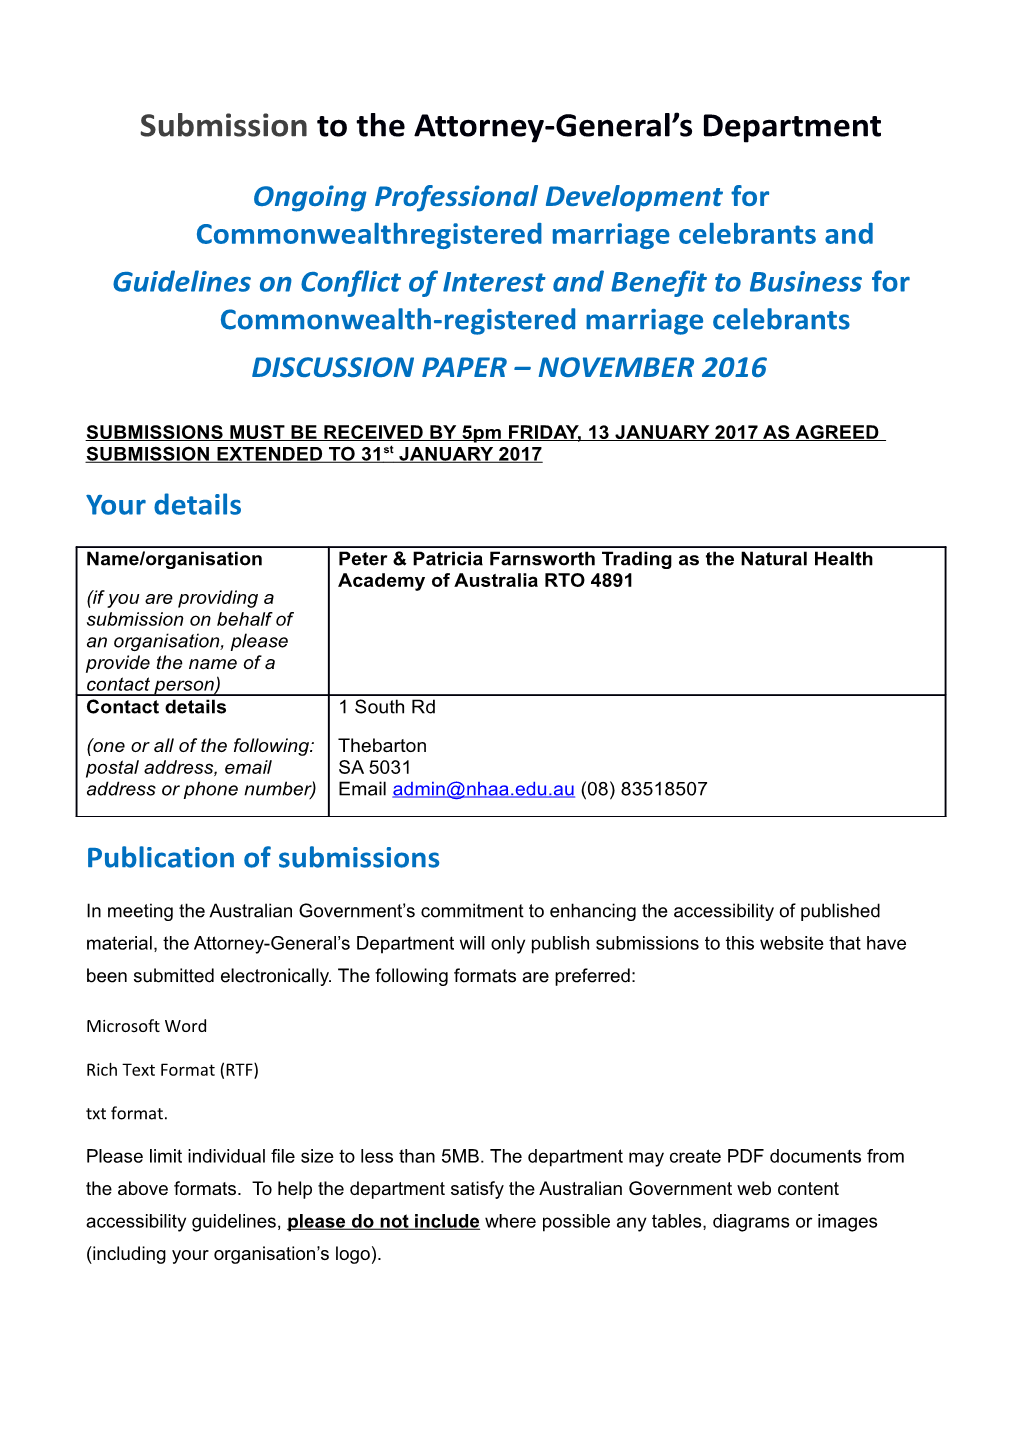 Submissions to OPD for Marriage Celebrants Consultation - Natural Health Academy of Australia